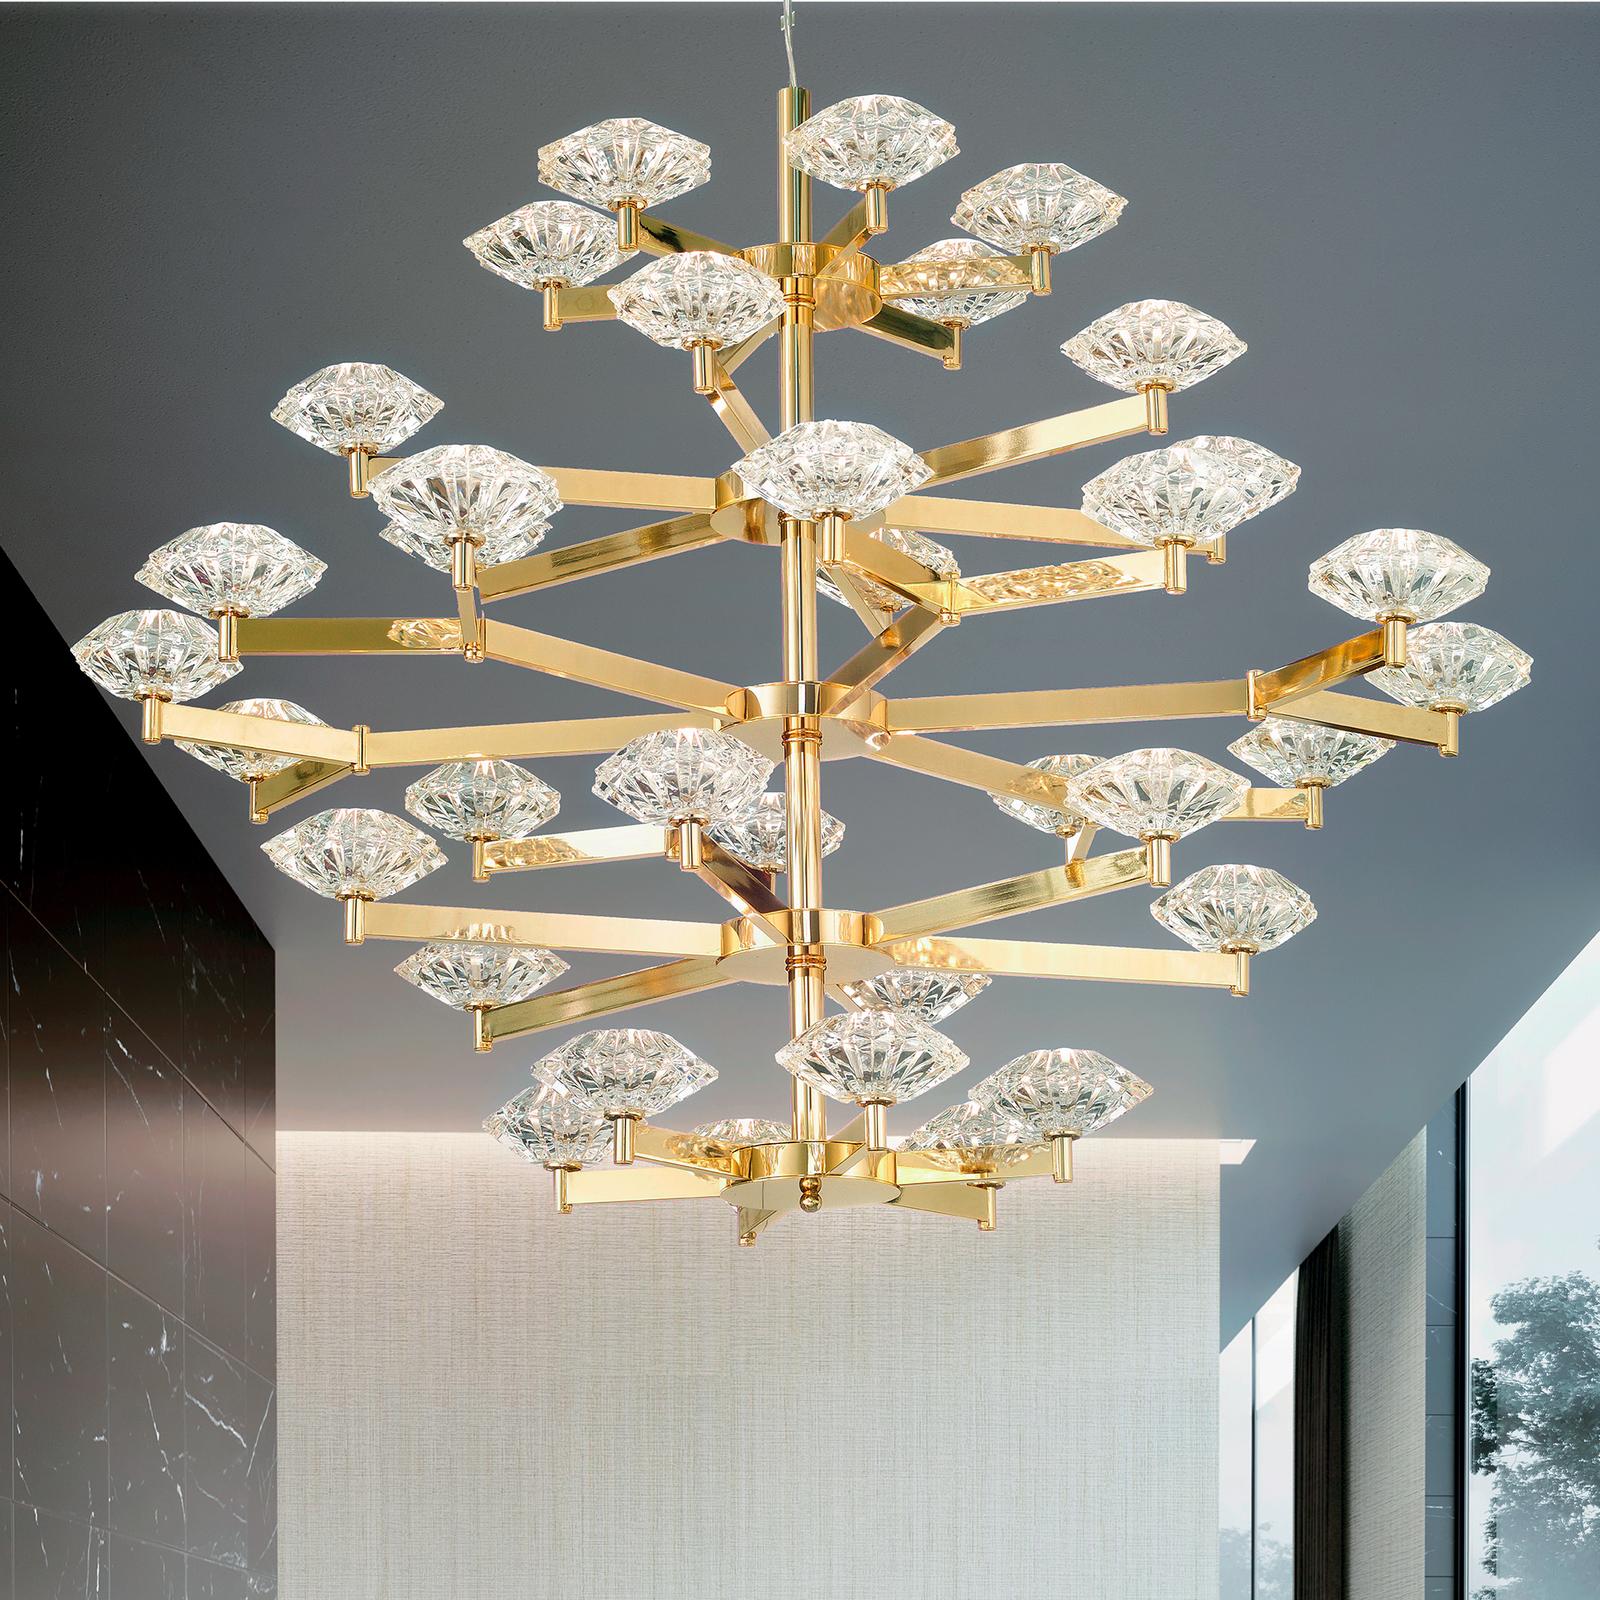 This exquisite chandelier is a superb object of functional decor that will illuminate a contemporary home while also adding a striking decoration that is both modern and lavish. The structure is crafted of brass with a soft gold finish and comprises